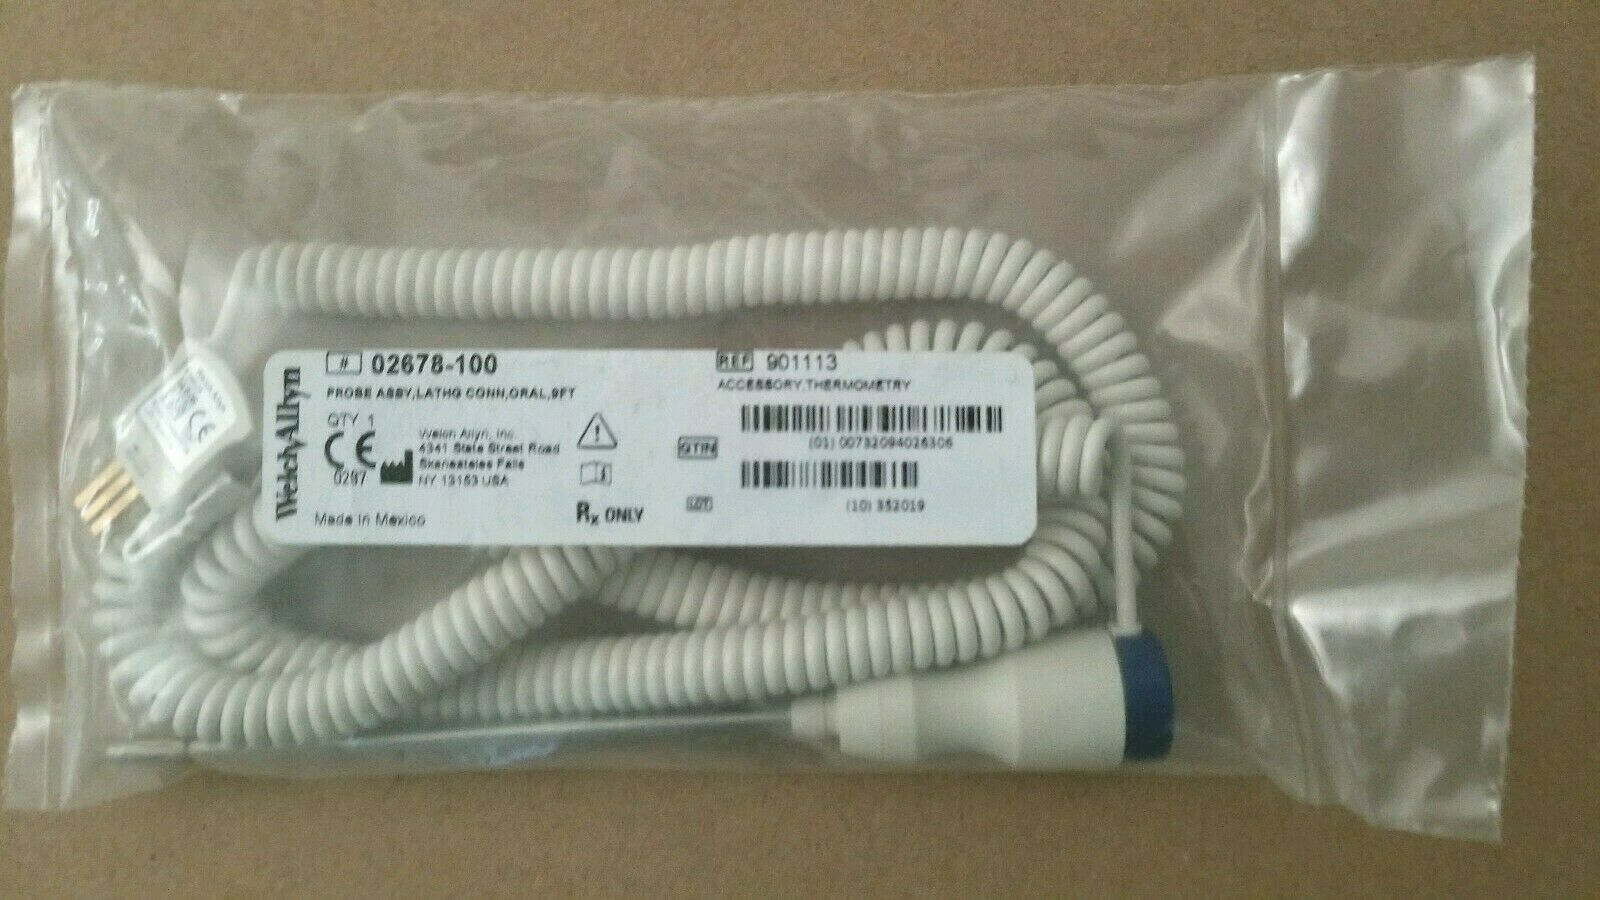 Welch Allyn Oral Thermometer Probe Assy Kit, Ref 02678–100 - New